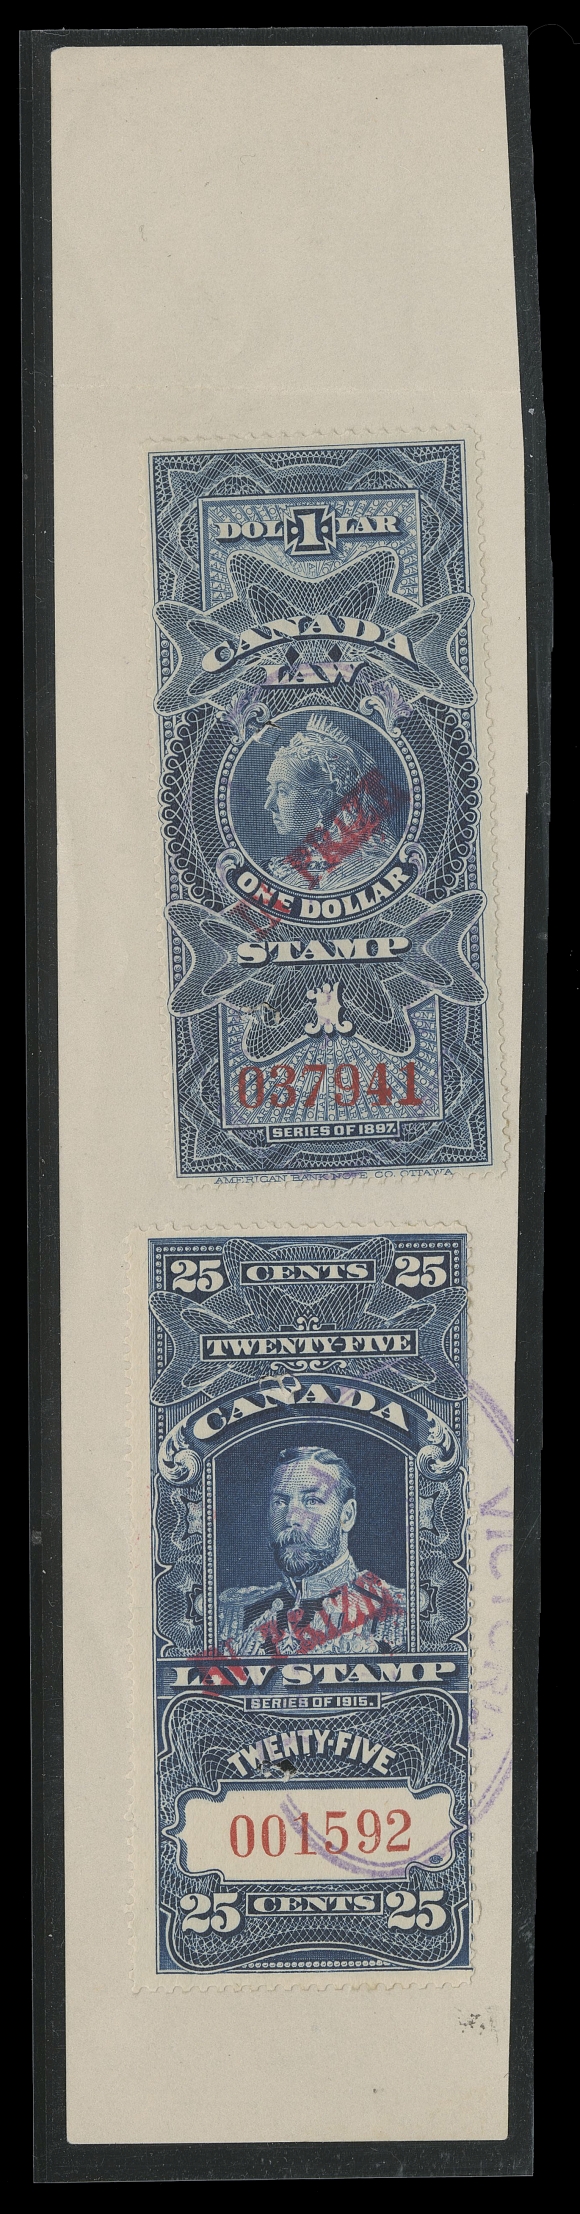 CANADA REVENUES (FEDERAL)  FSC30, 31,The least known (and by far the rarest) of the three Exchequer  Court of Canada In Prize cases, a document piece bearing single  $1 Widow Queen & 25c KGV with "IN PRIZE" overprints in red,  serial numbers "037941" and "001592" respectively, punch  cancelled, the latter tied by double oval Victoria Registry  datestamp, "re-attached" to photocopy of original "The Weser"  document cancelled Dec 9 1940. In Prize revenue stamps reappeared into service after two decades.

A historically significant Canadian Revenue item, a highlight  piece to anyone